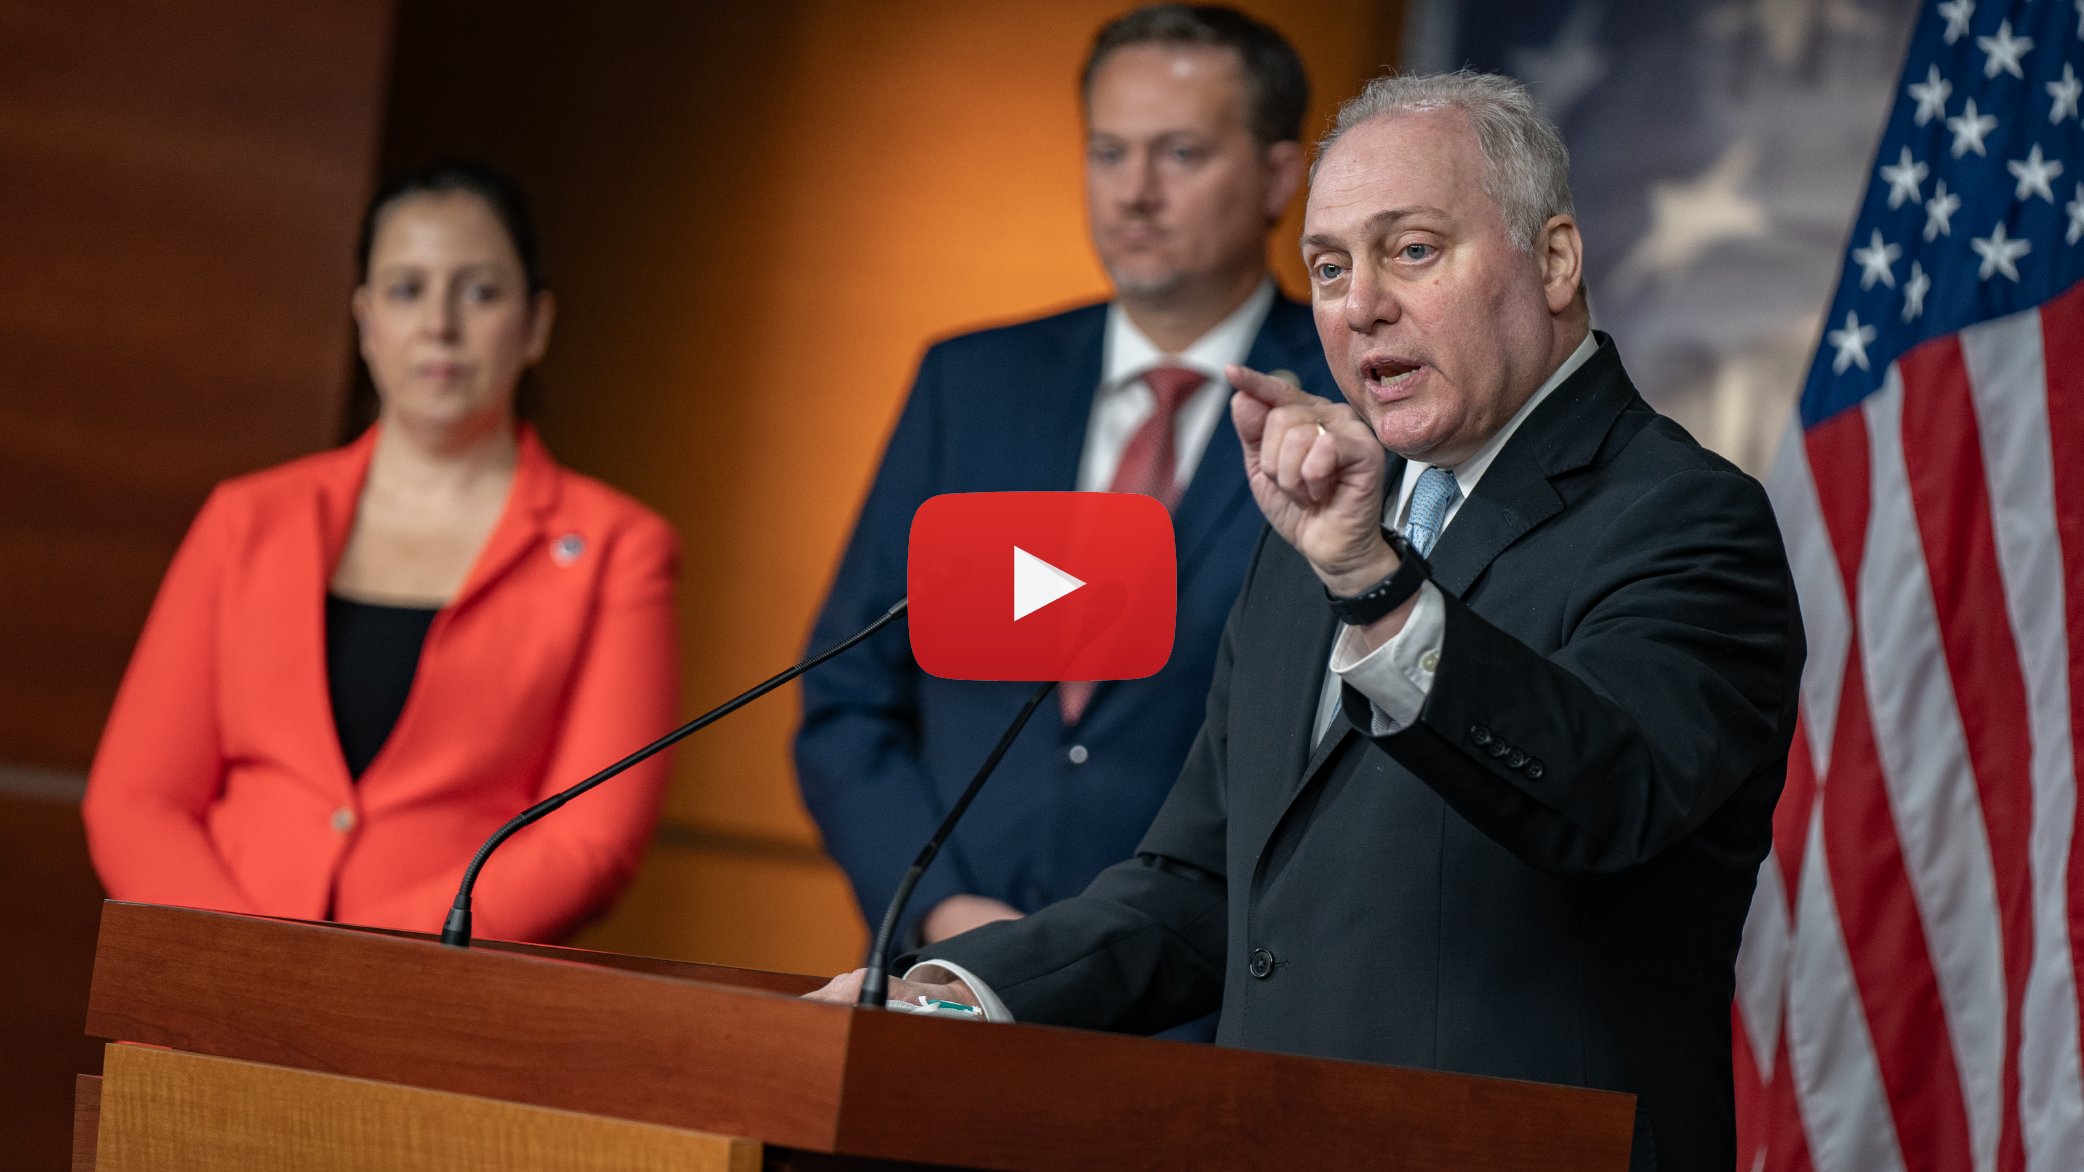 Scalise: The Border Must Be Secured